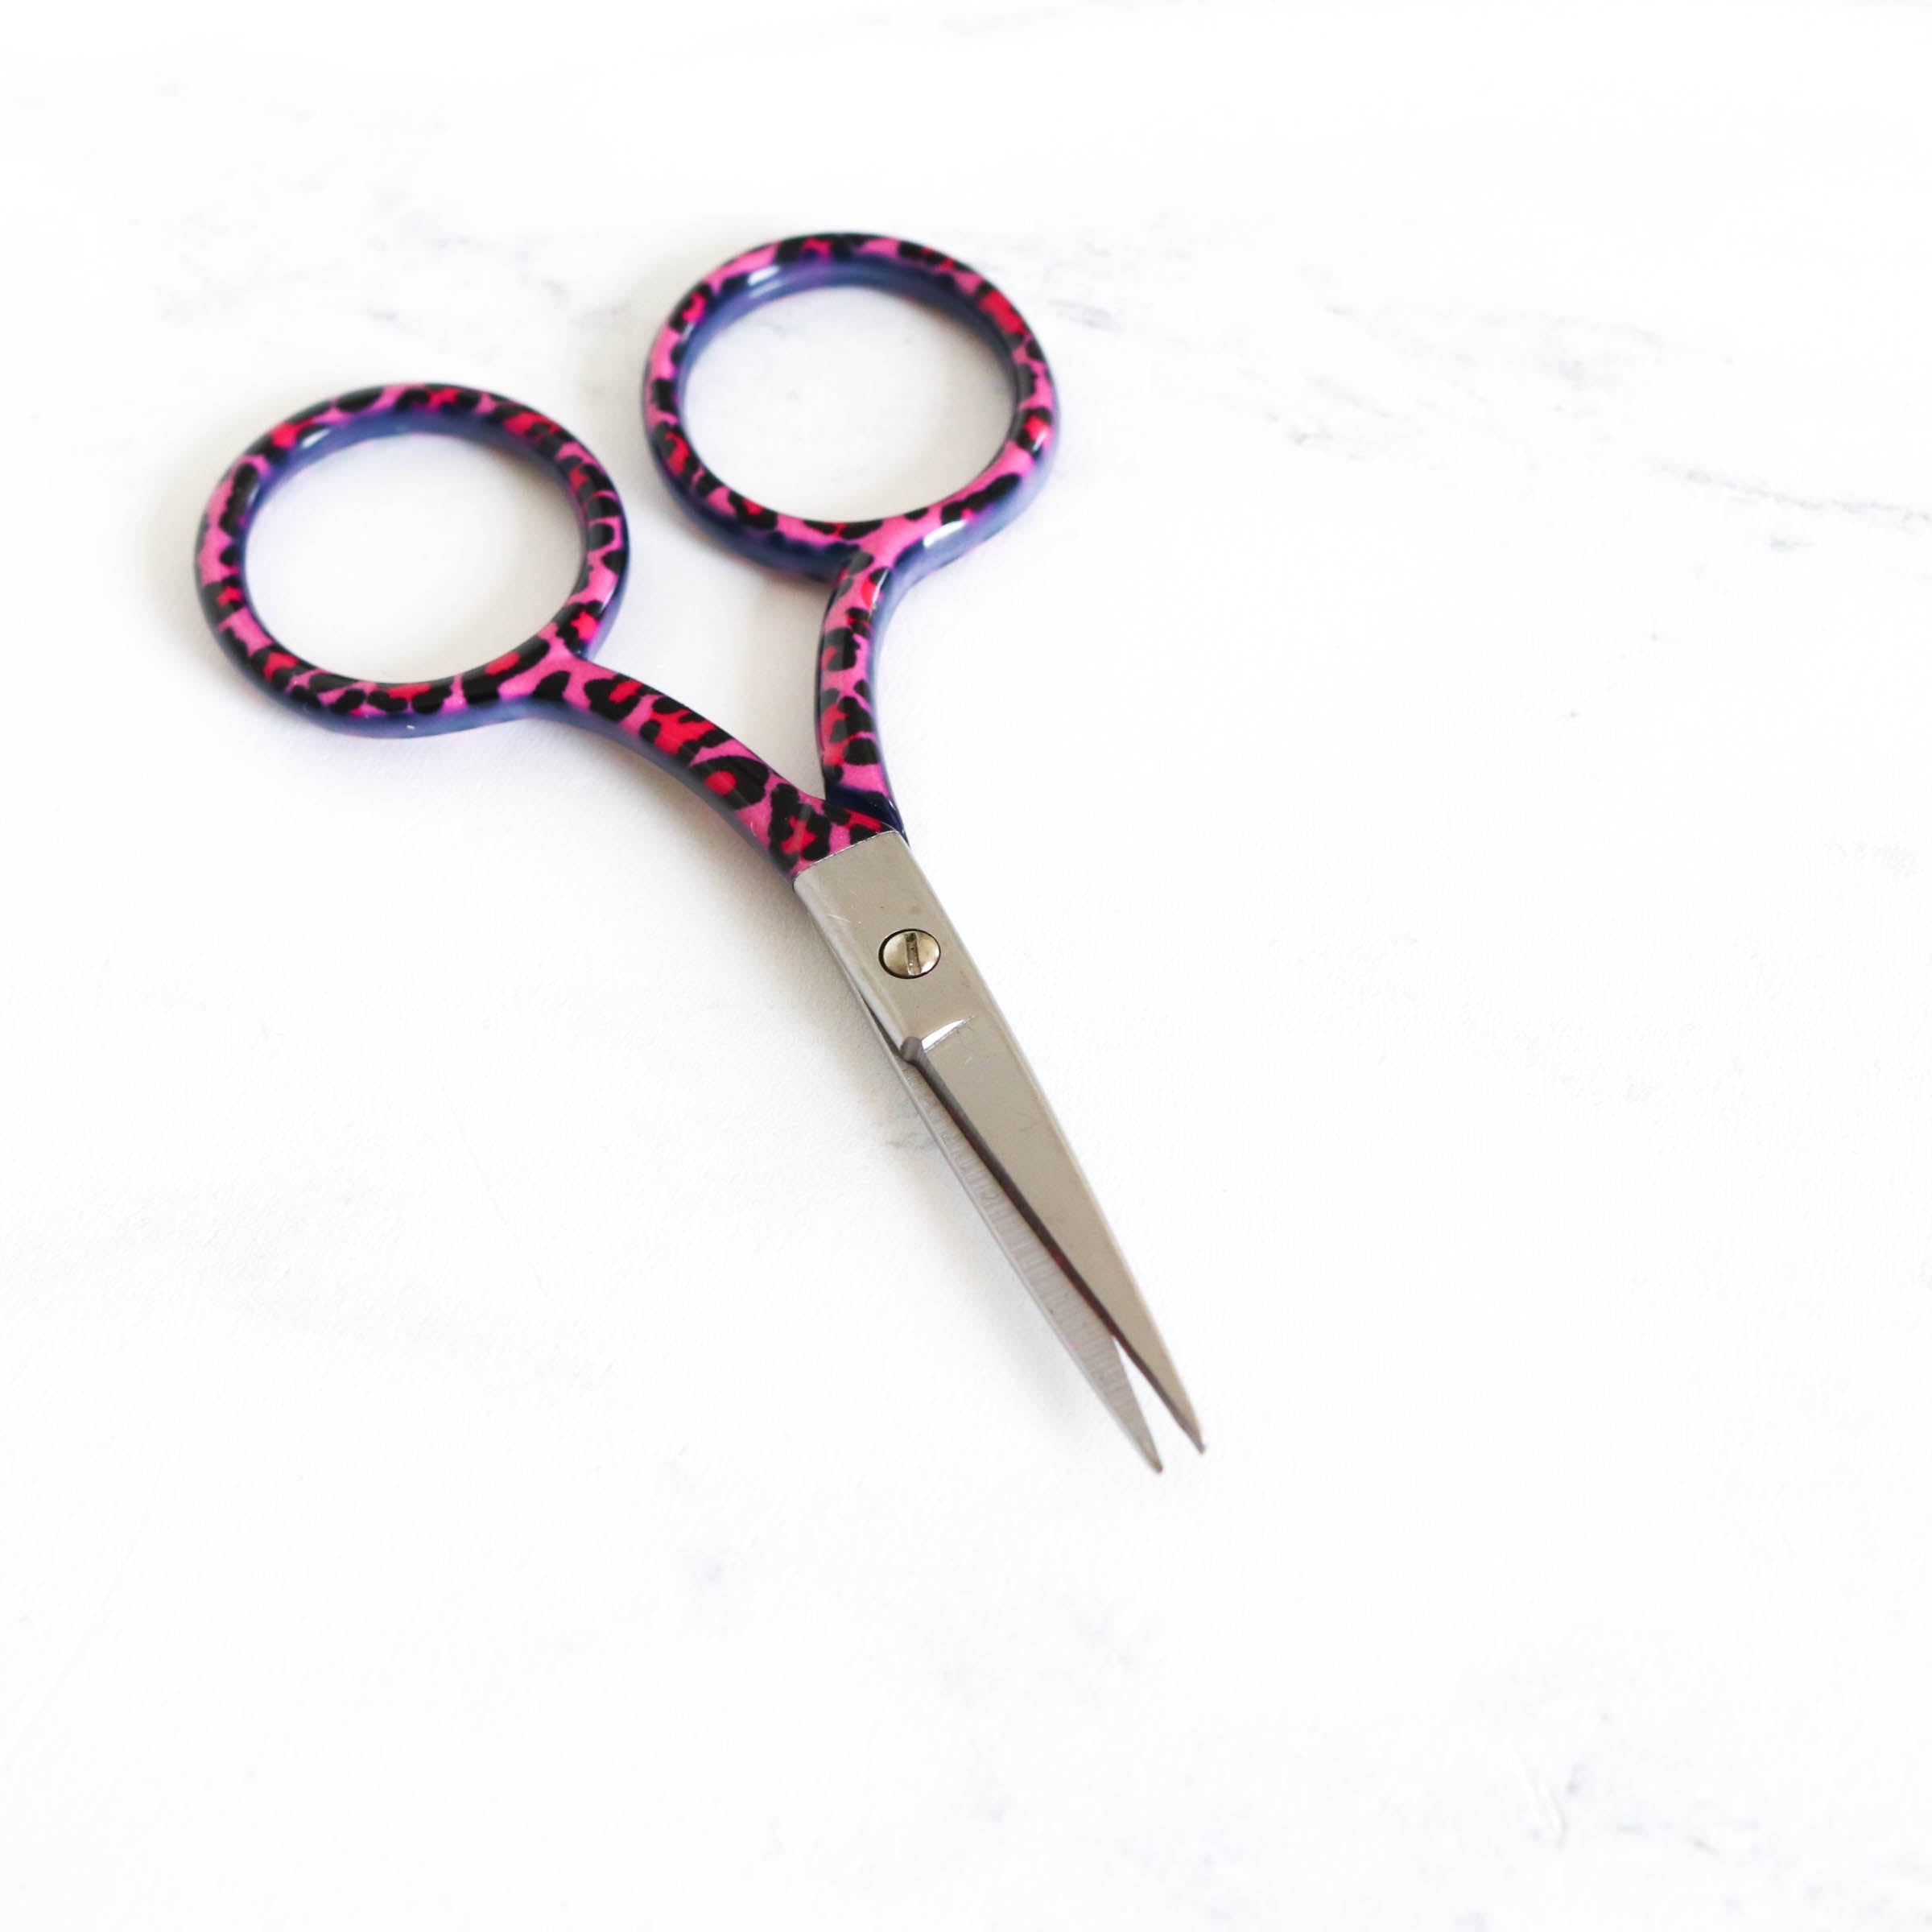 Smile Scissors, Cute Colorful Orchid Pink Compact Scissors, for Cross  Stitch, Embroidery, Gift for Crafter 